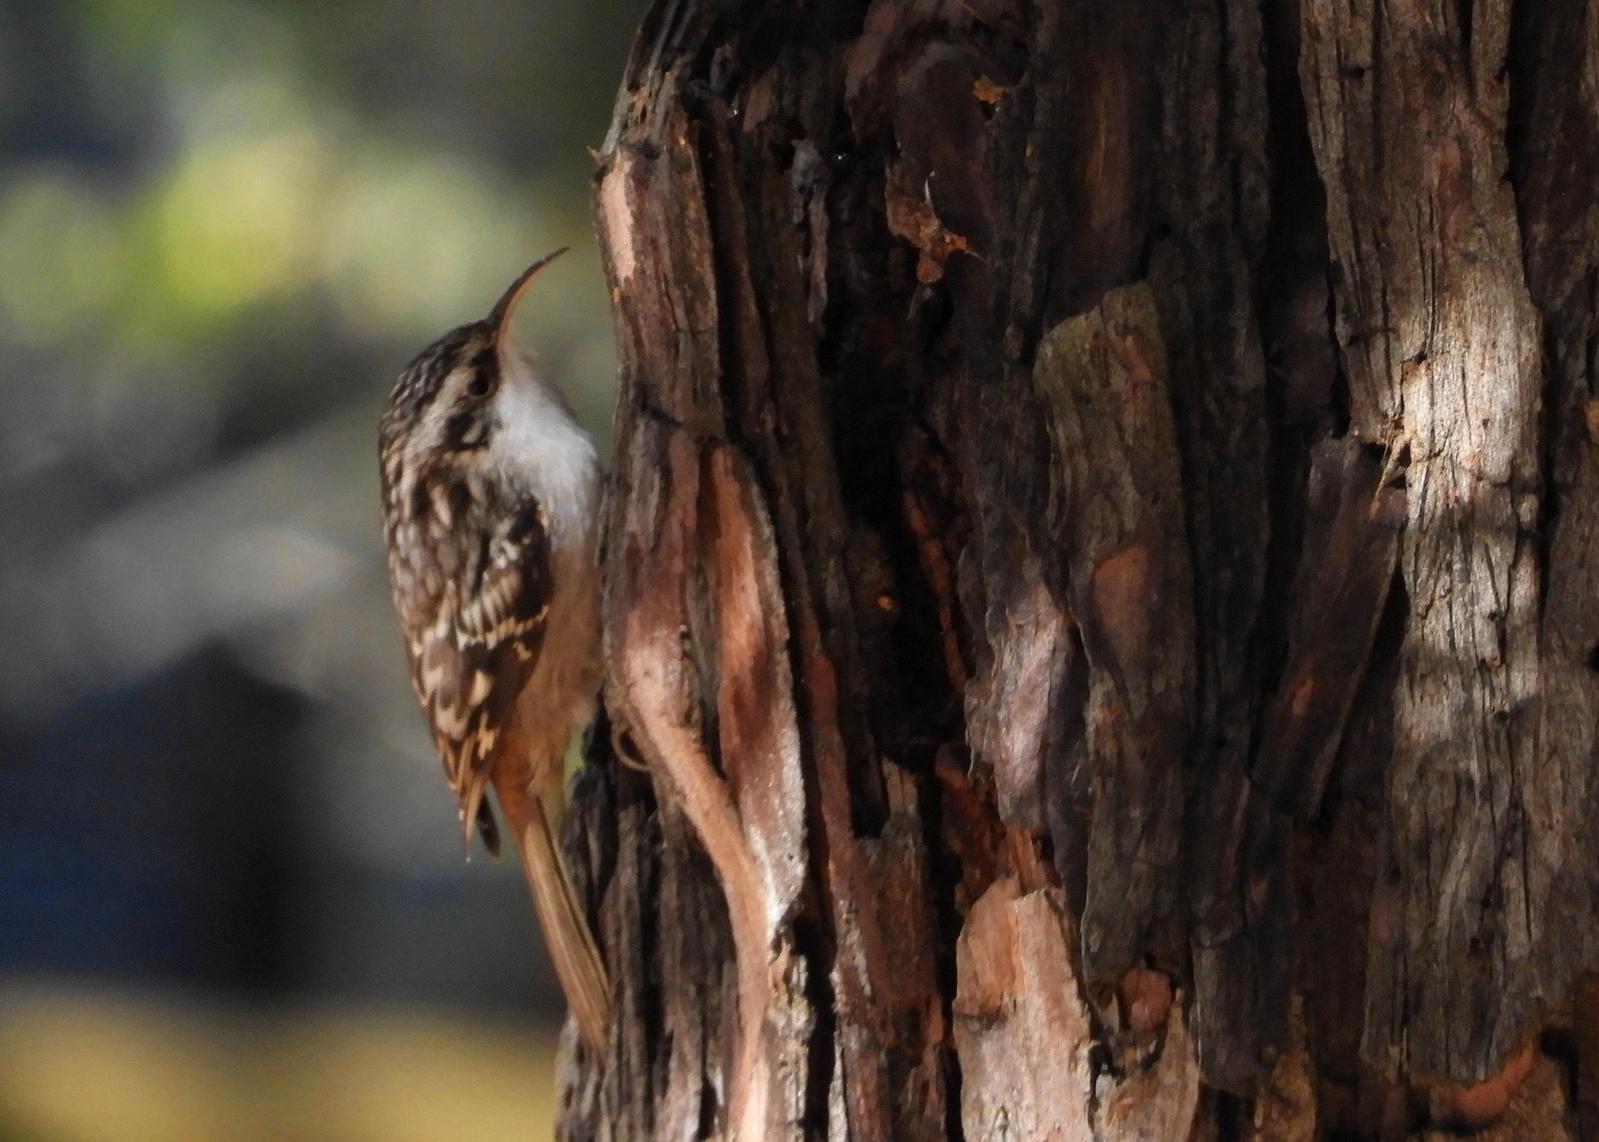 Brown Creeper Photo by Yvonne Burch-Hartley